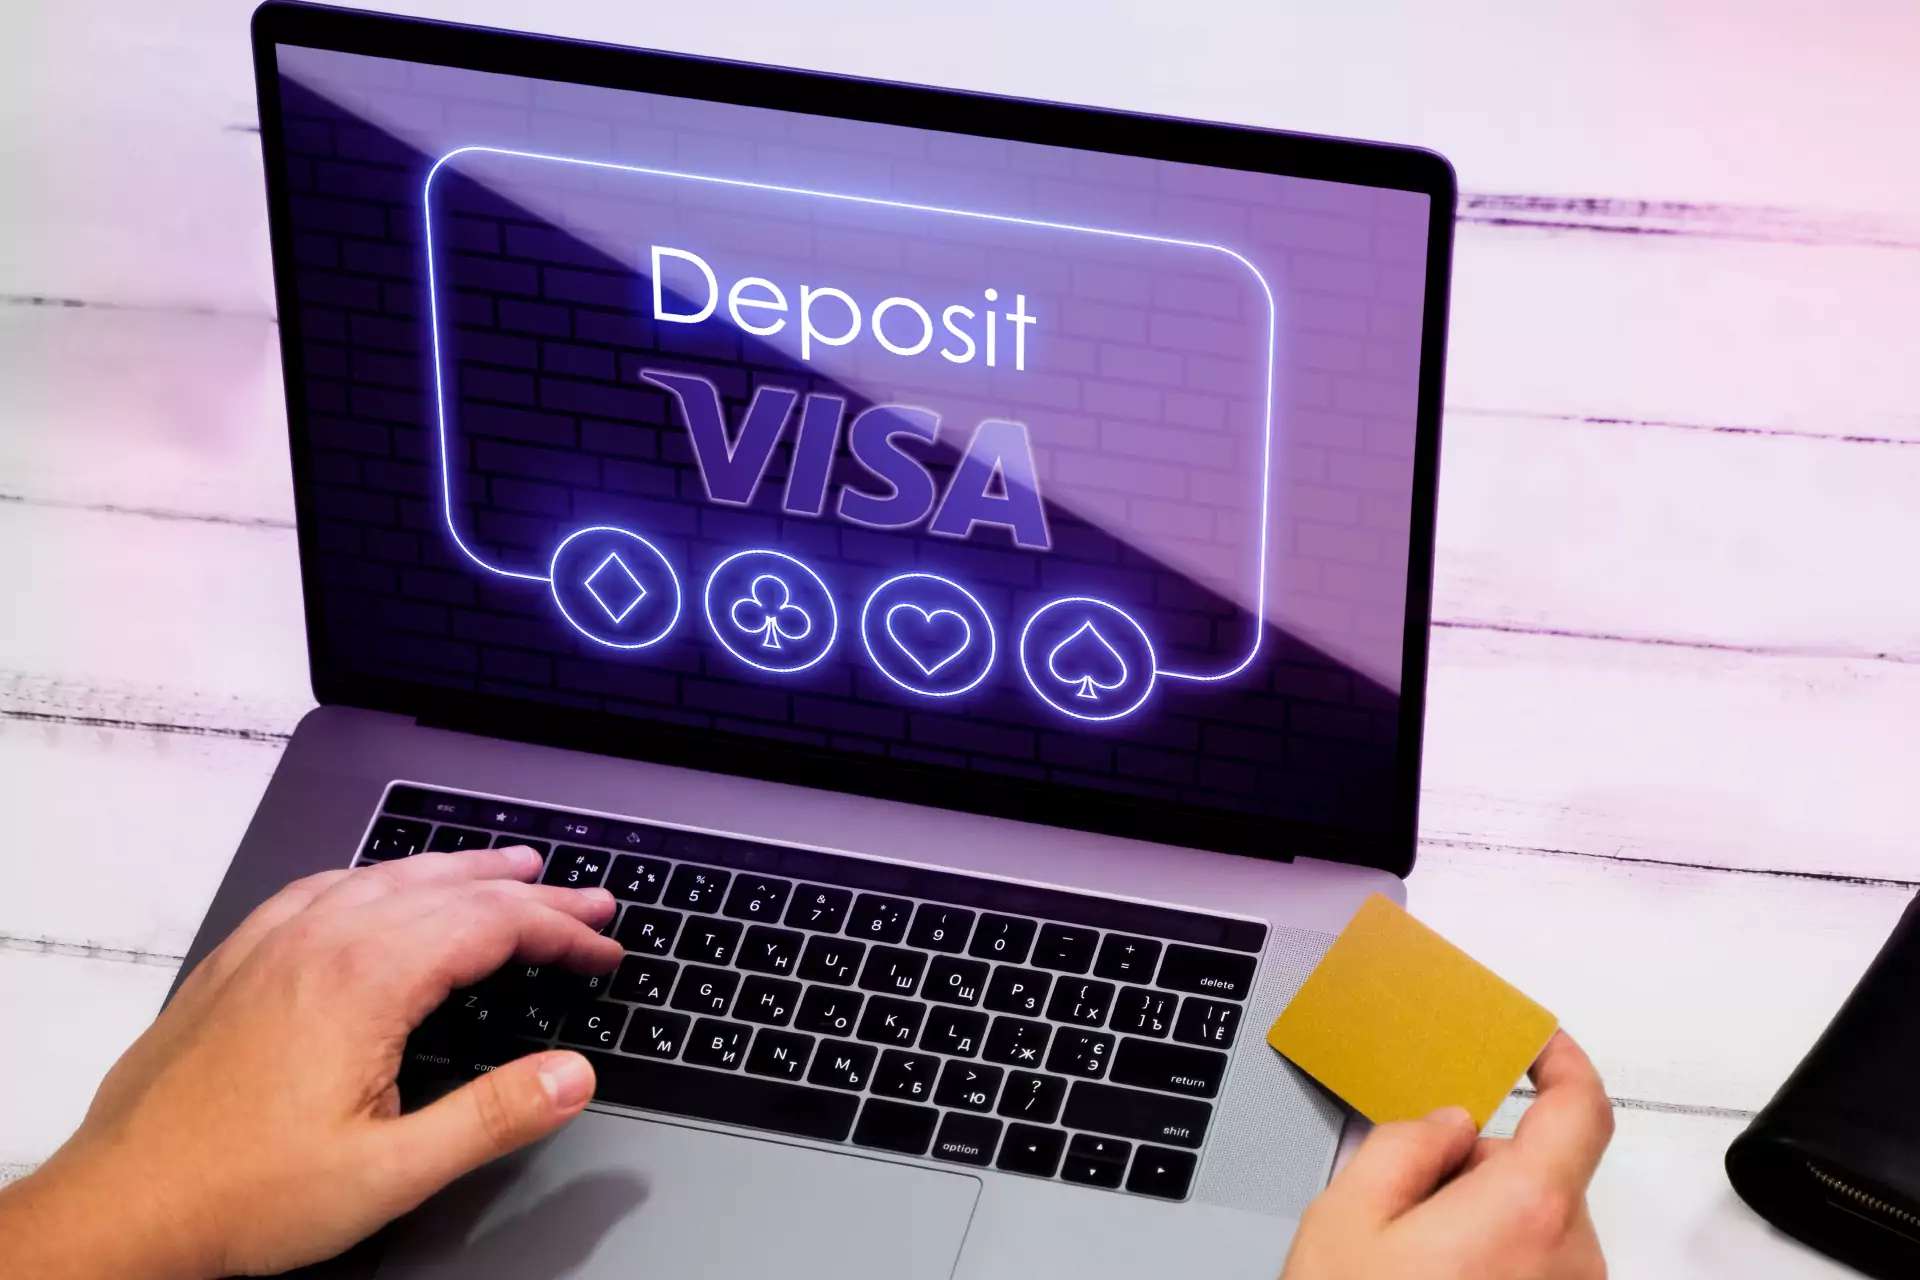 Create a bank account and open a Visa card to be able to transfer money to and from your casino account.